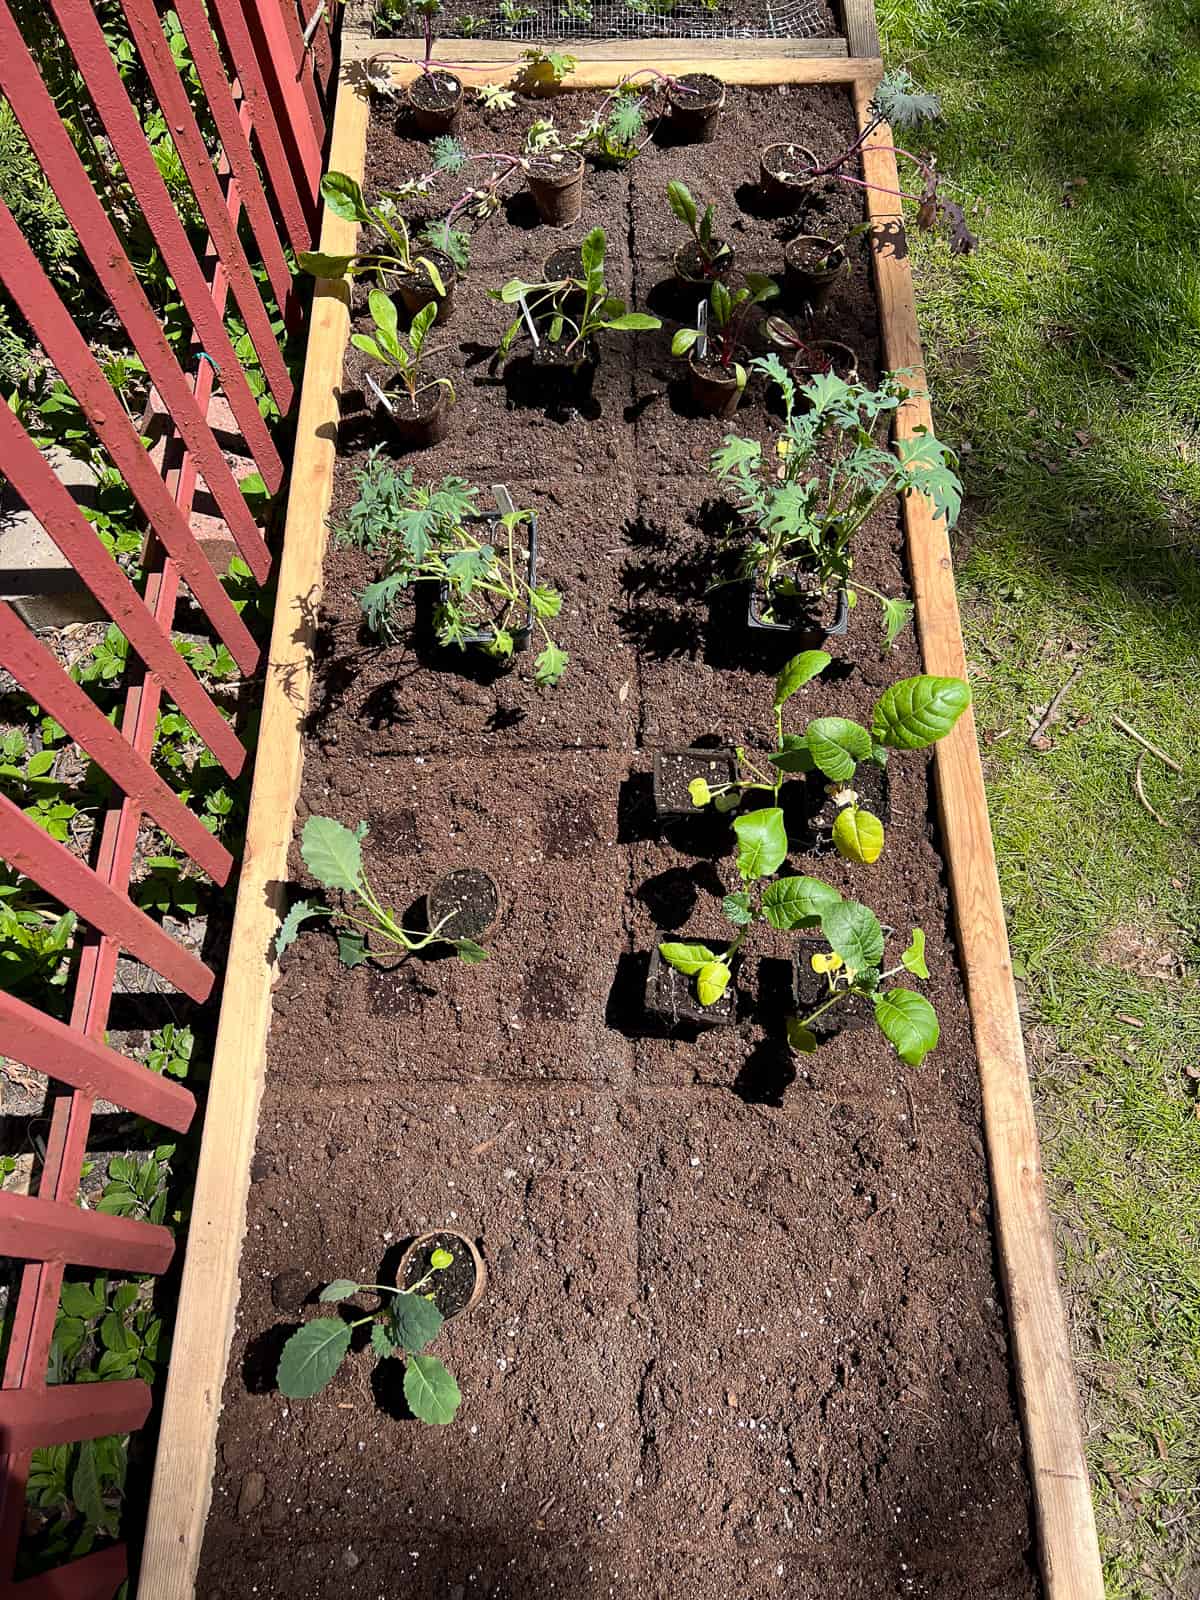 An image of a raised bed with various plants spread out for spacing purposes.